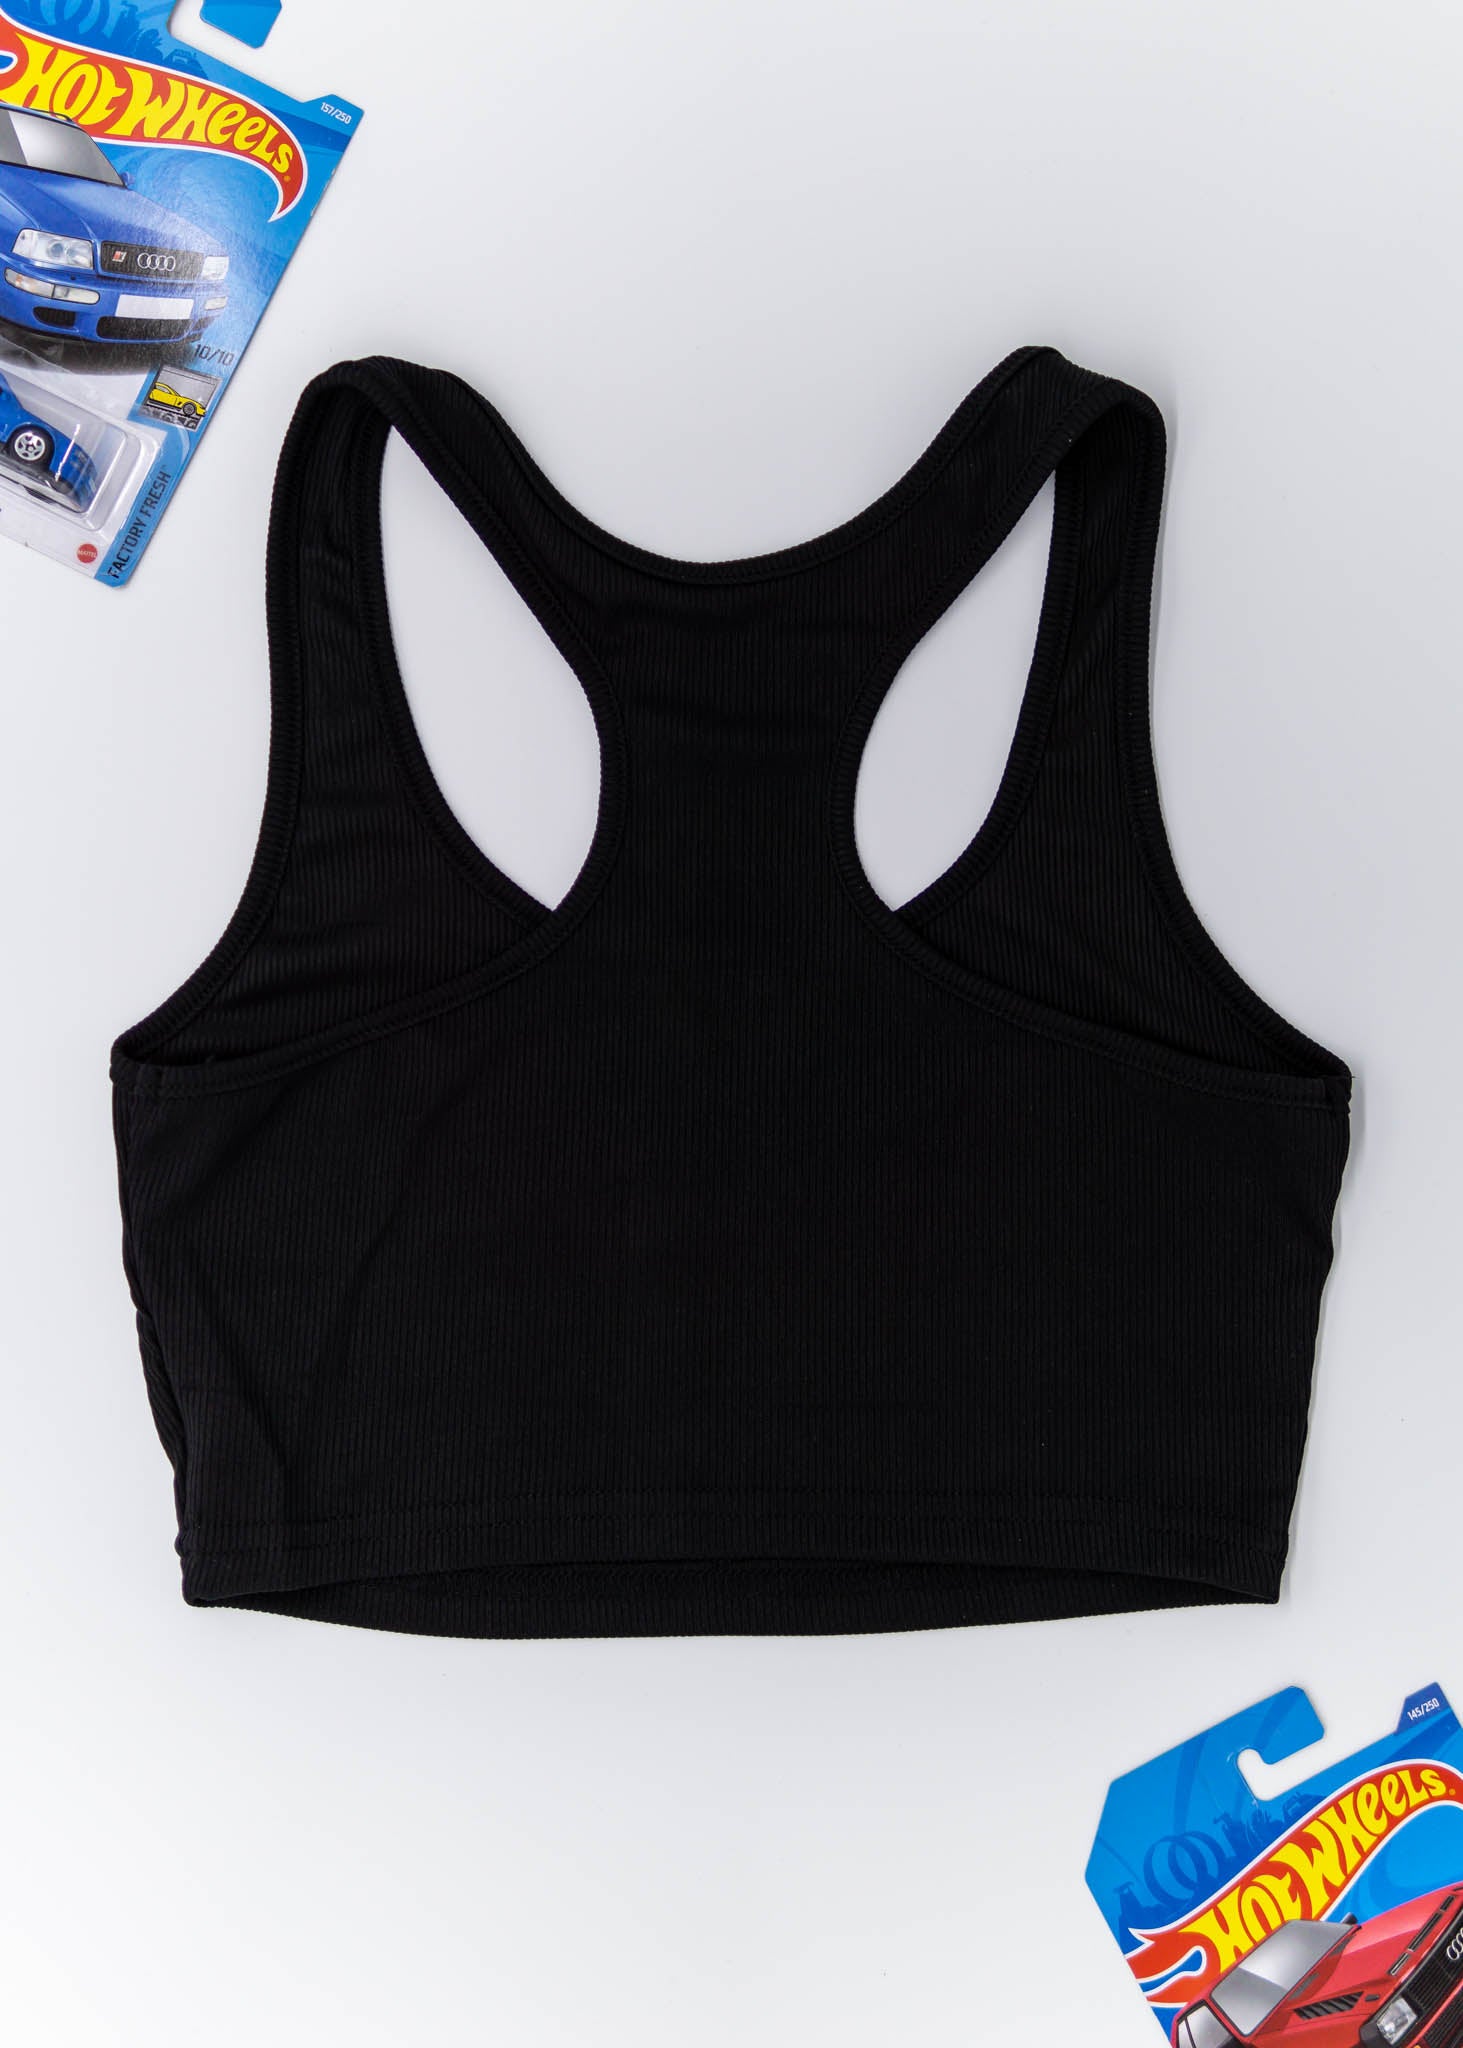 A black Audi crop top for women. Photo is a blank canvas back view of the top with an embroidered imola yellow Audi B5 RS4. Fabric composition is polyester, and elastine. The material is stretchy, ribbed, and non-transparent. The style of this shirt is sleeveless, with a crewneck neckline.